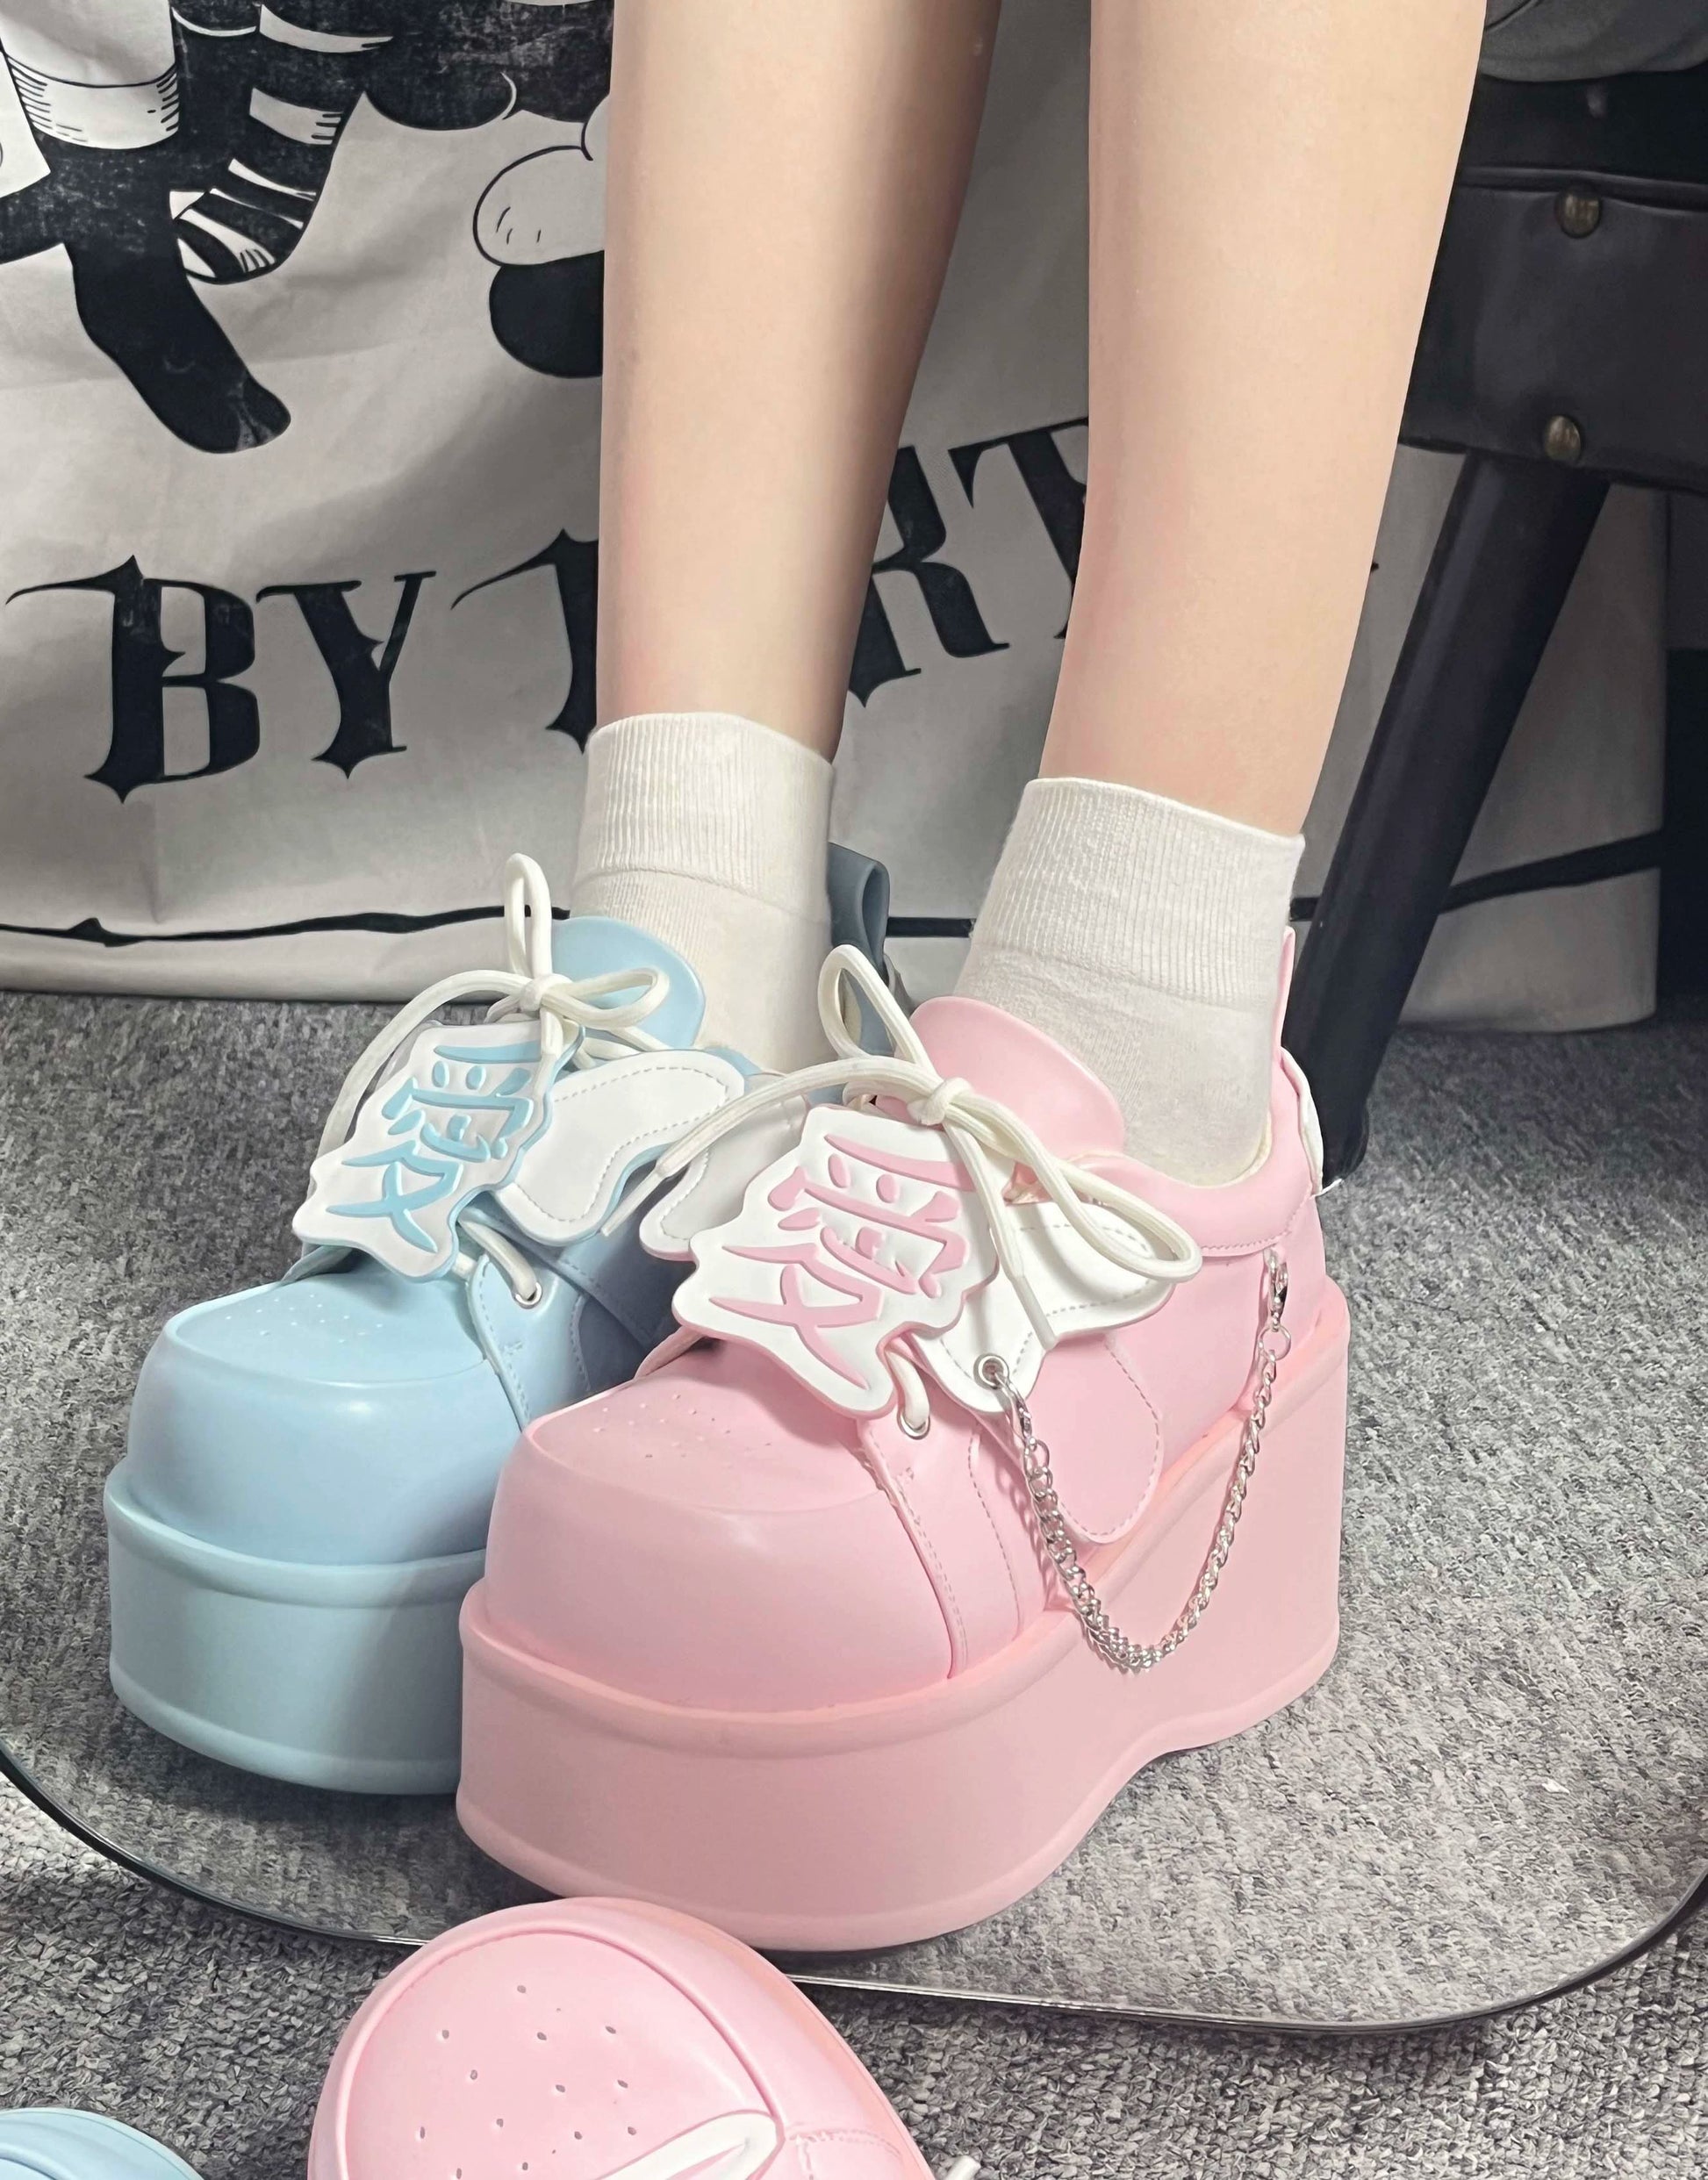 Tenshi Kaiwai Platform Shoes Subculture Thick-soled Shoes 35748:503484 35748:503484